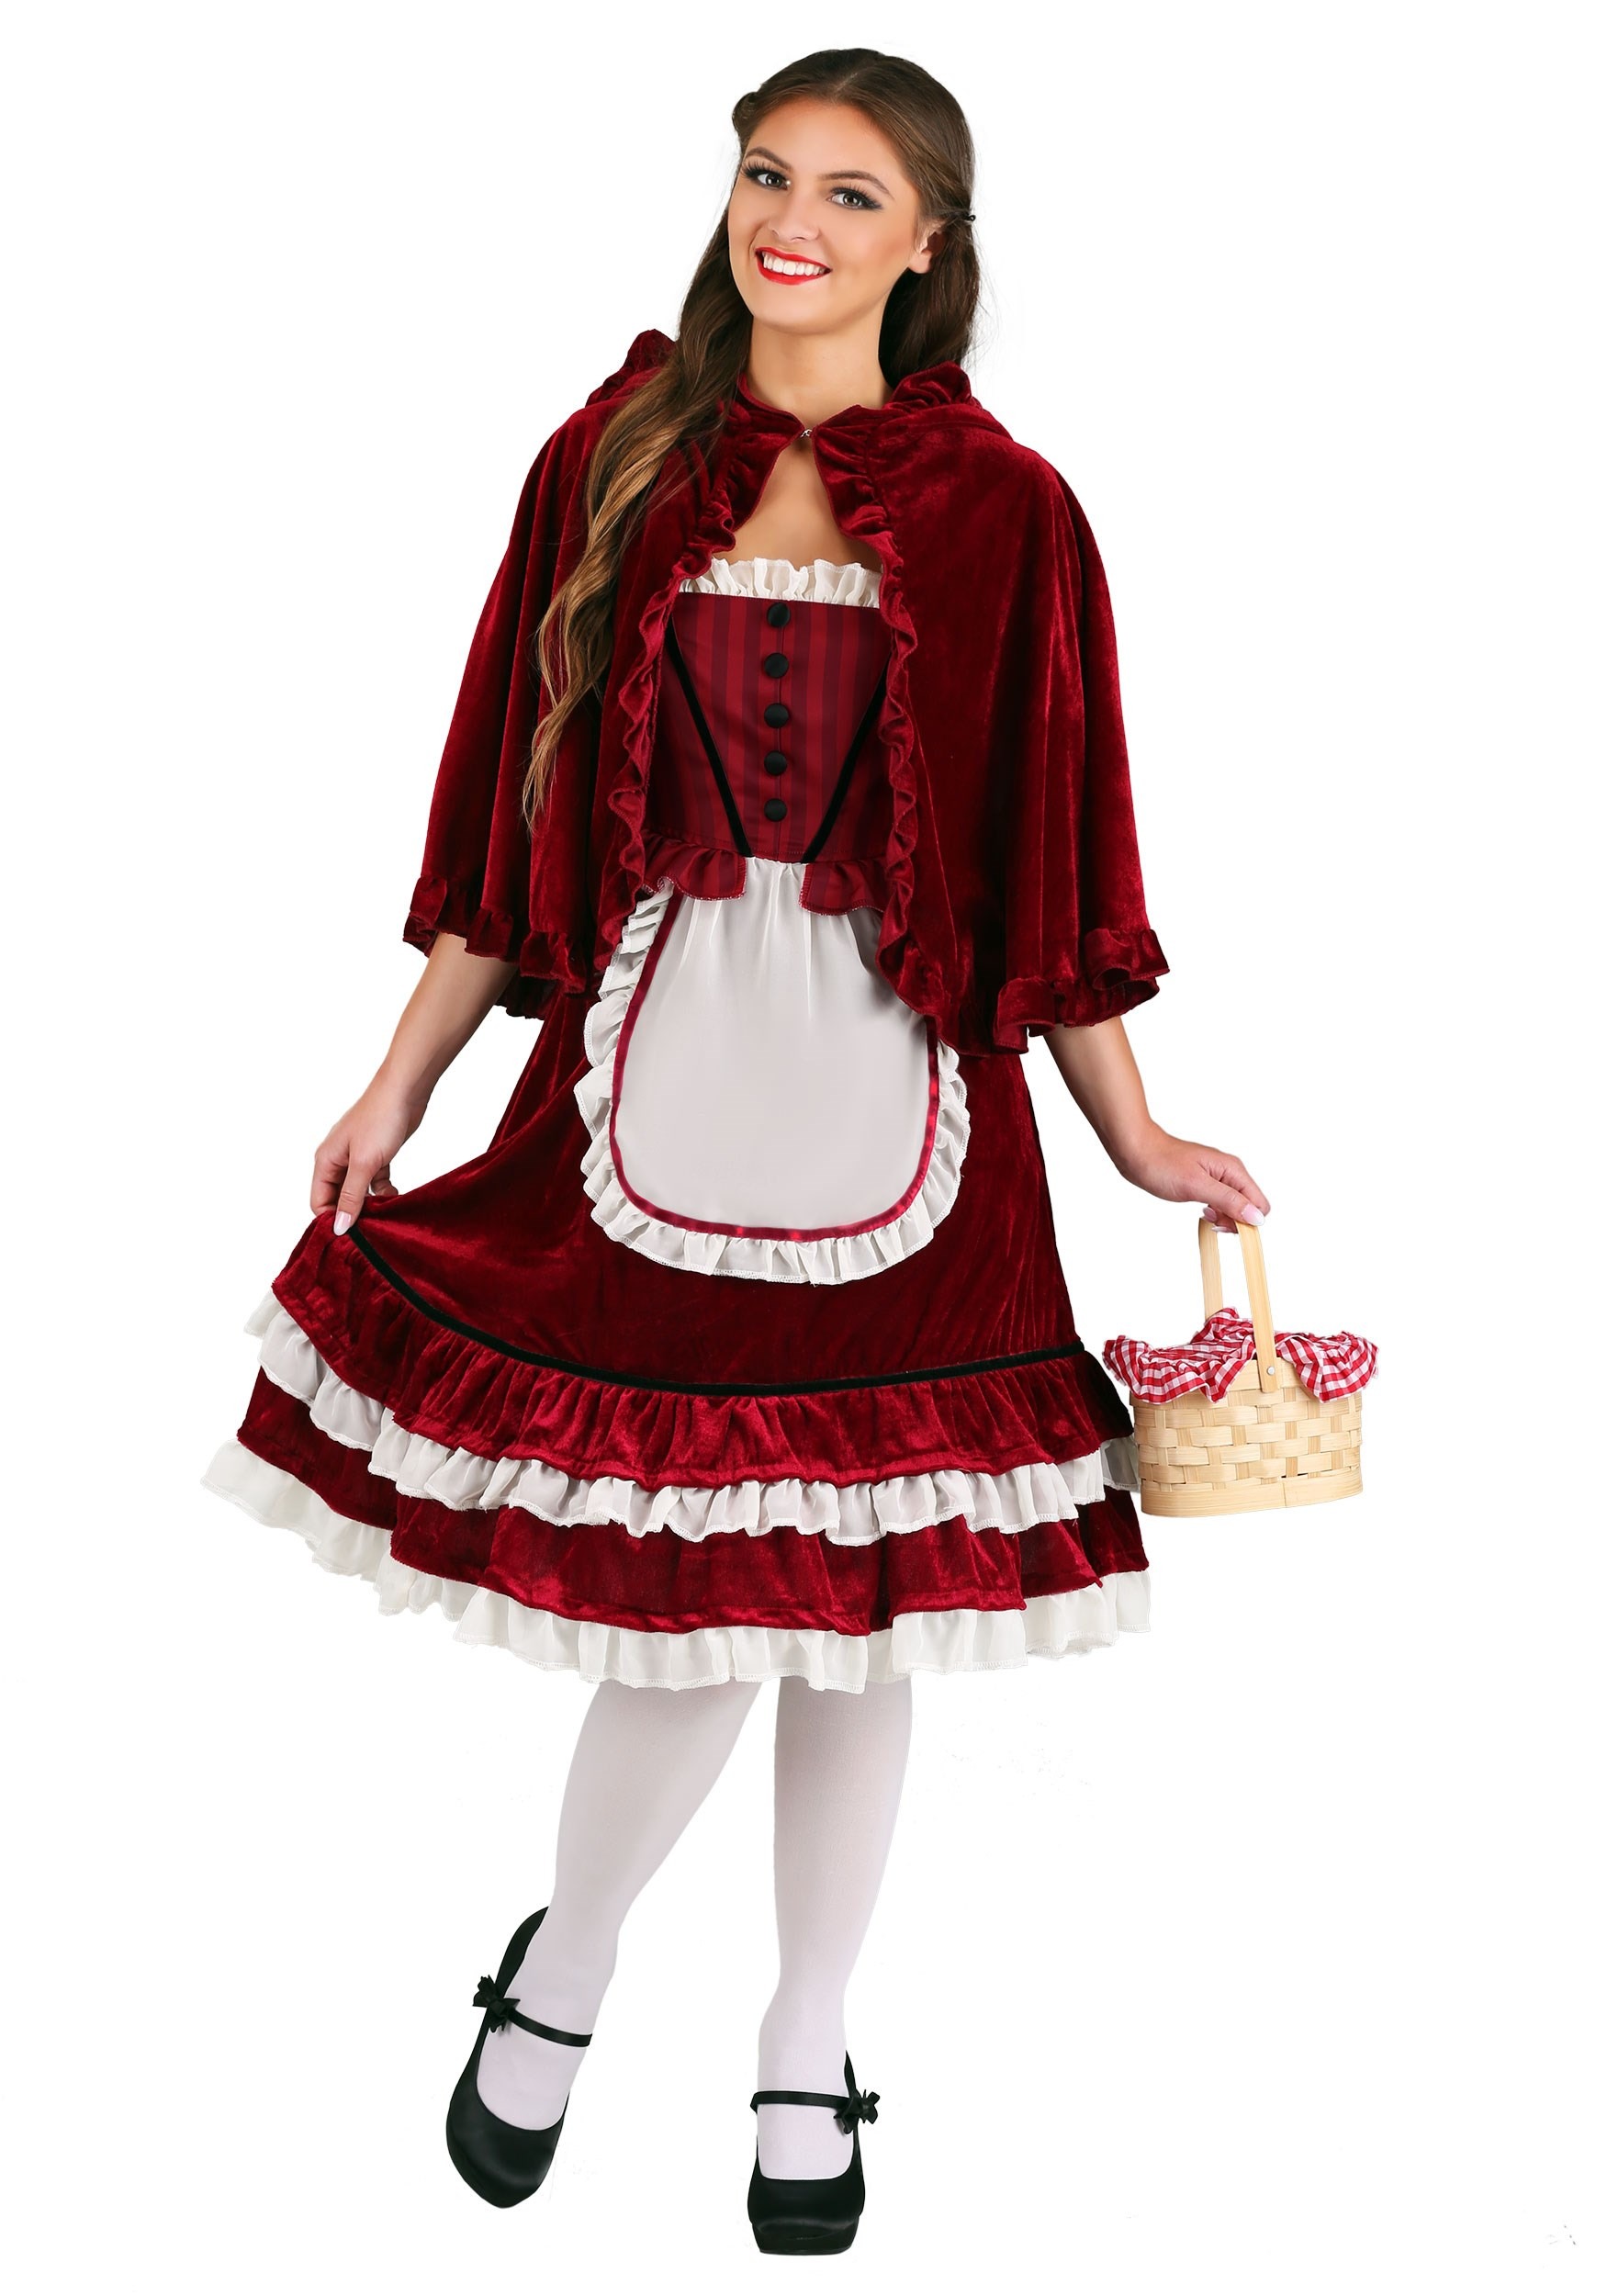 Classic Red Riding Hood Fancy Dress Costume For Women